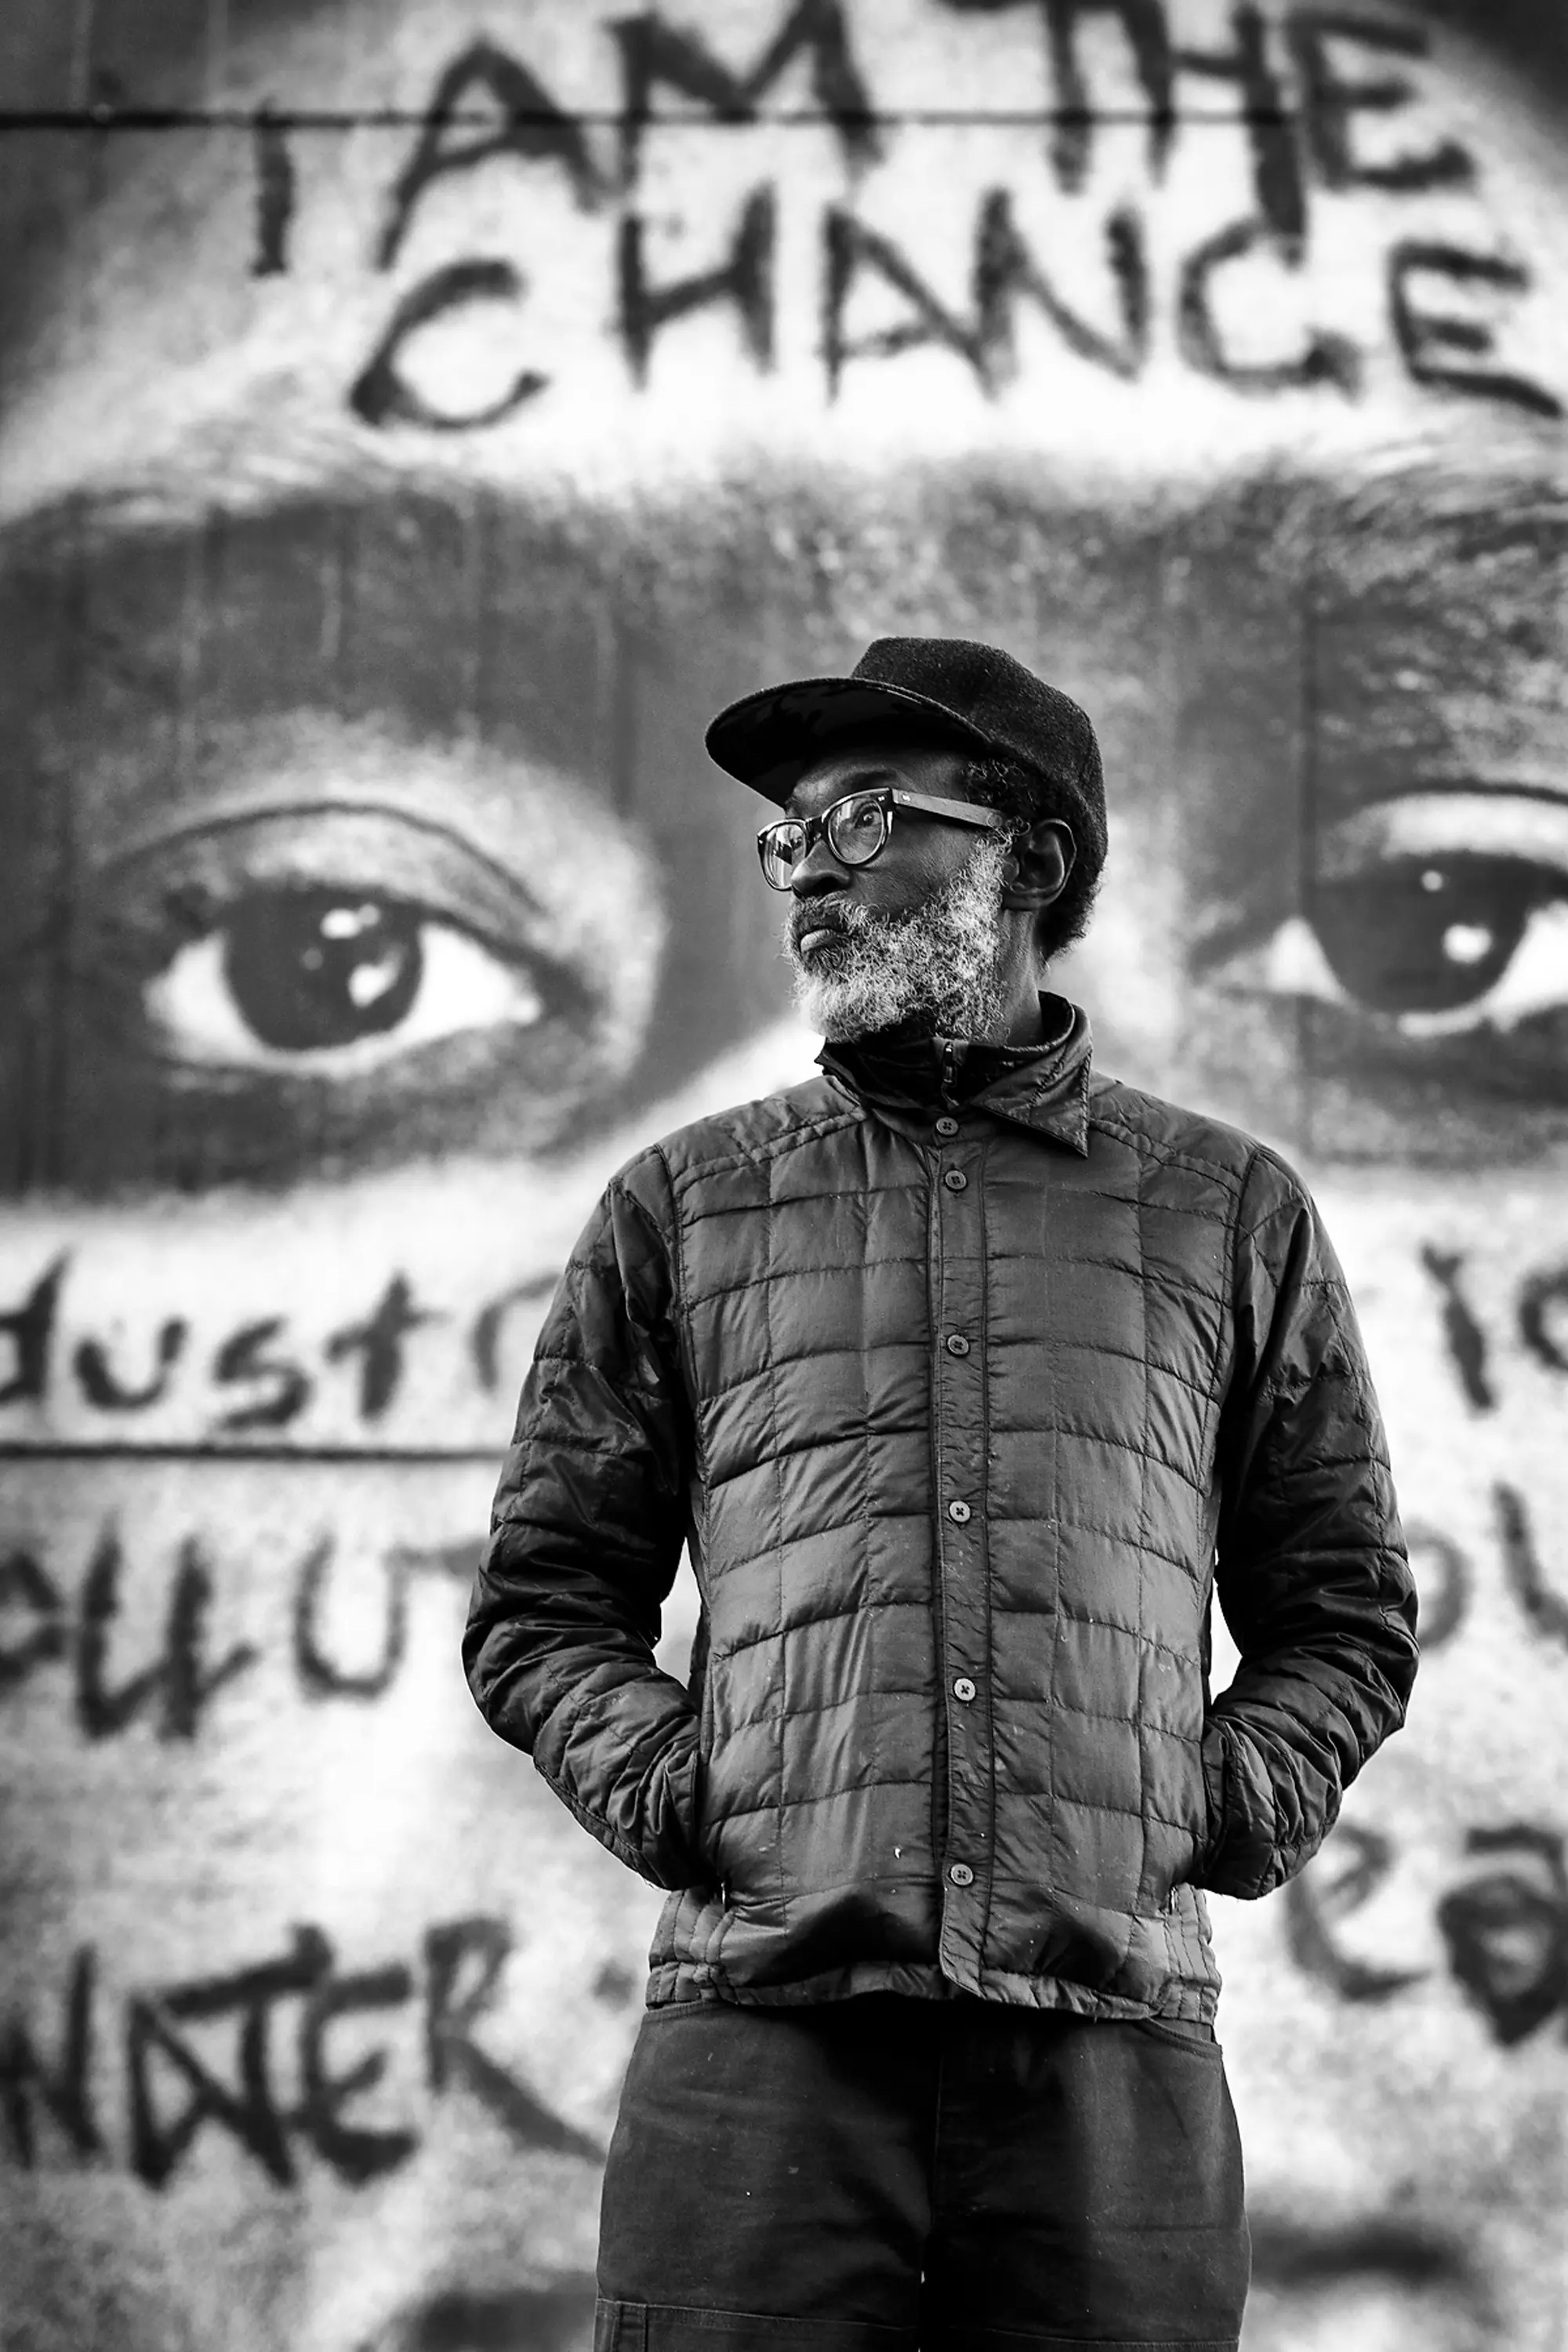 Photo portrait of Chip, a black man with white beard, glases, hat, and puffy jacket looking to the left. Behind him is a large photograph of a face.